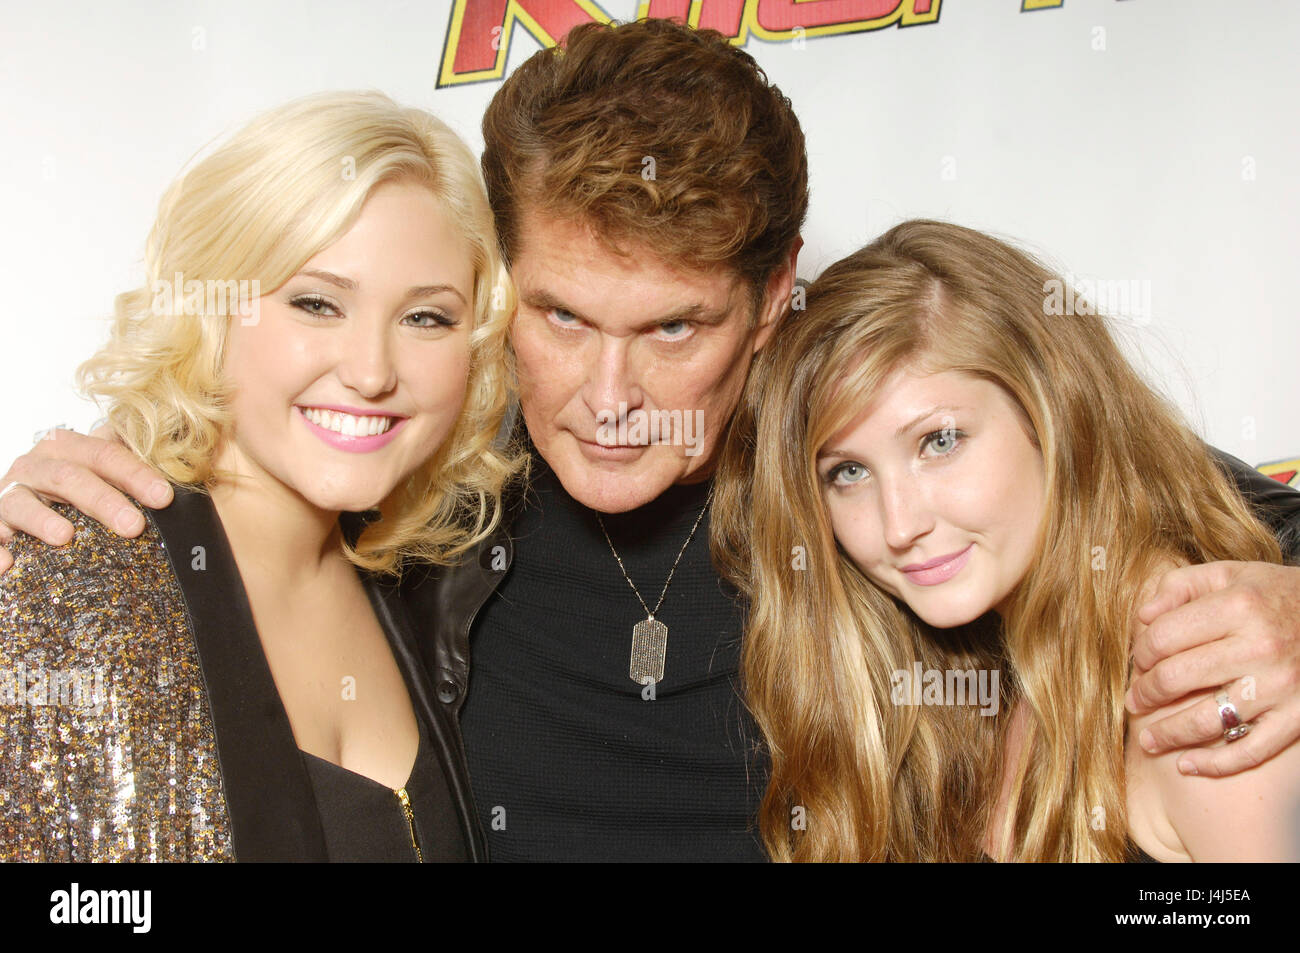 David Hasselhoff (C) and his daughters Hayley Hasselhoff and Taylor Hasselhoff arrive at KIIS FM's Wango Tango 2010 red carpet at the Staples Center on May 15, 2010 in Los Angeles, California. Stock Photo